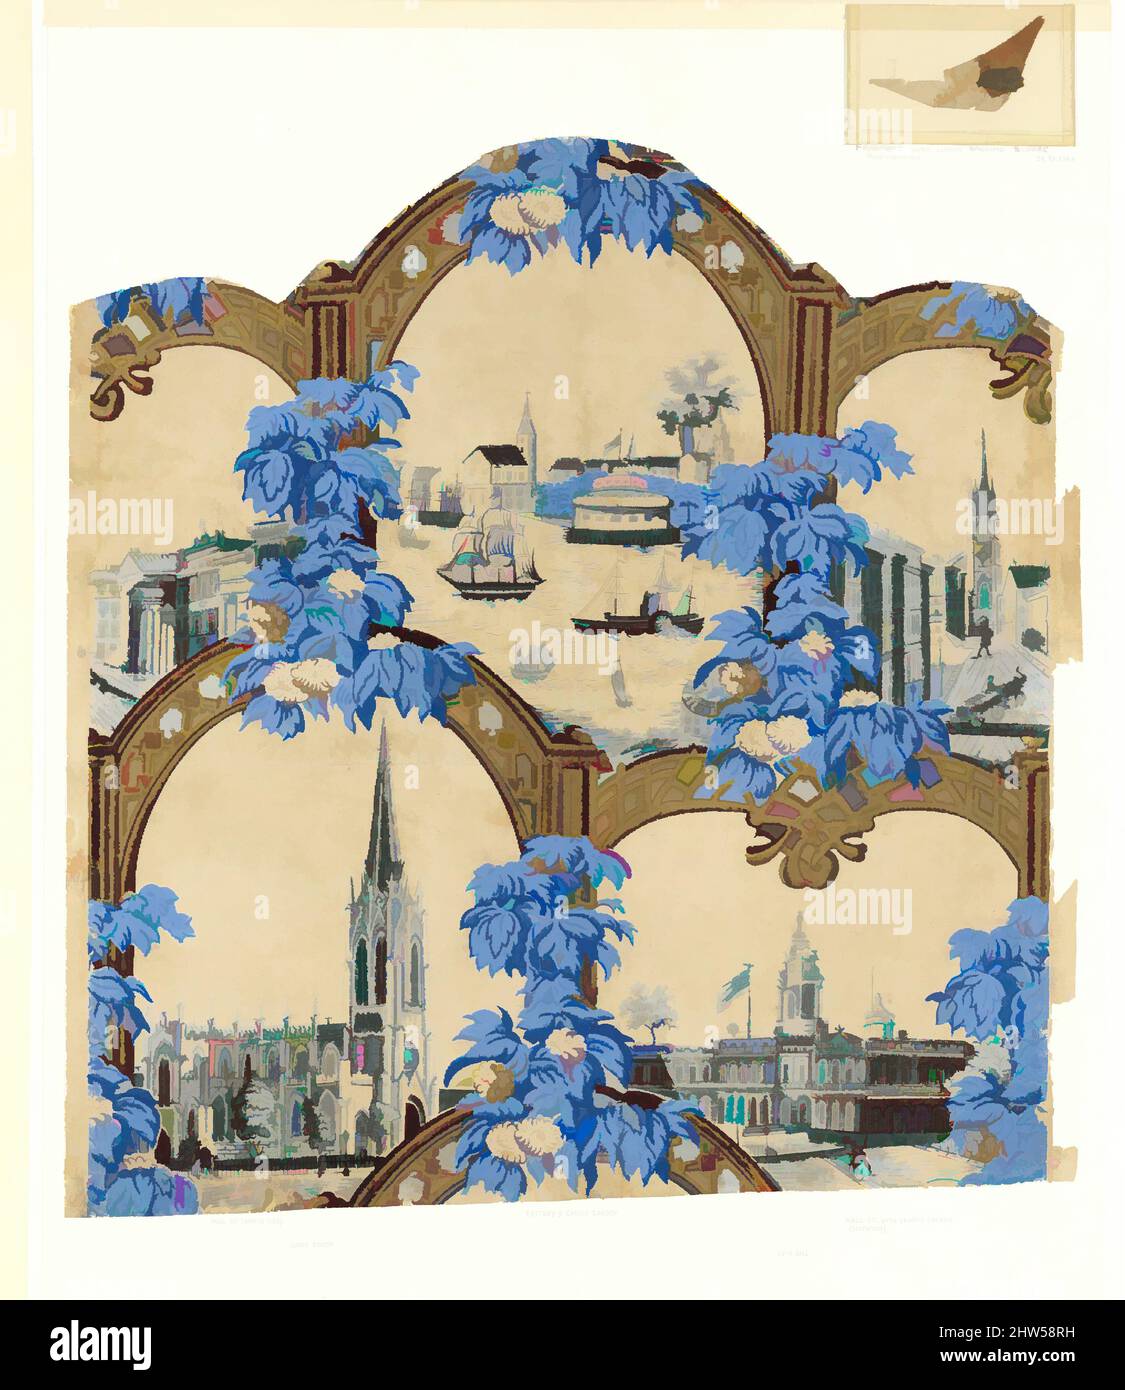 Art inspired by Wallpaper Decorated with New York City Landmarks, ca. 1840–50, Block printed in colors, repeat: 20 13/16 x 18 3/4 in. (52.9 x 47.7 cm), Wallpaper, Anonymous, American, 19th century, Classic works modernized by Artotop with a splash of modernity. Shapes, color and value, eye-catching visual impact on art. Emotions through freedom of artworks in a contemporary way. A timeless message pursuing a wildly creative new direction. Artists turning to the digital medium and creating the Artotop NFT Stock Photo